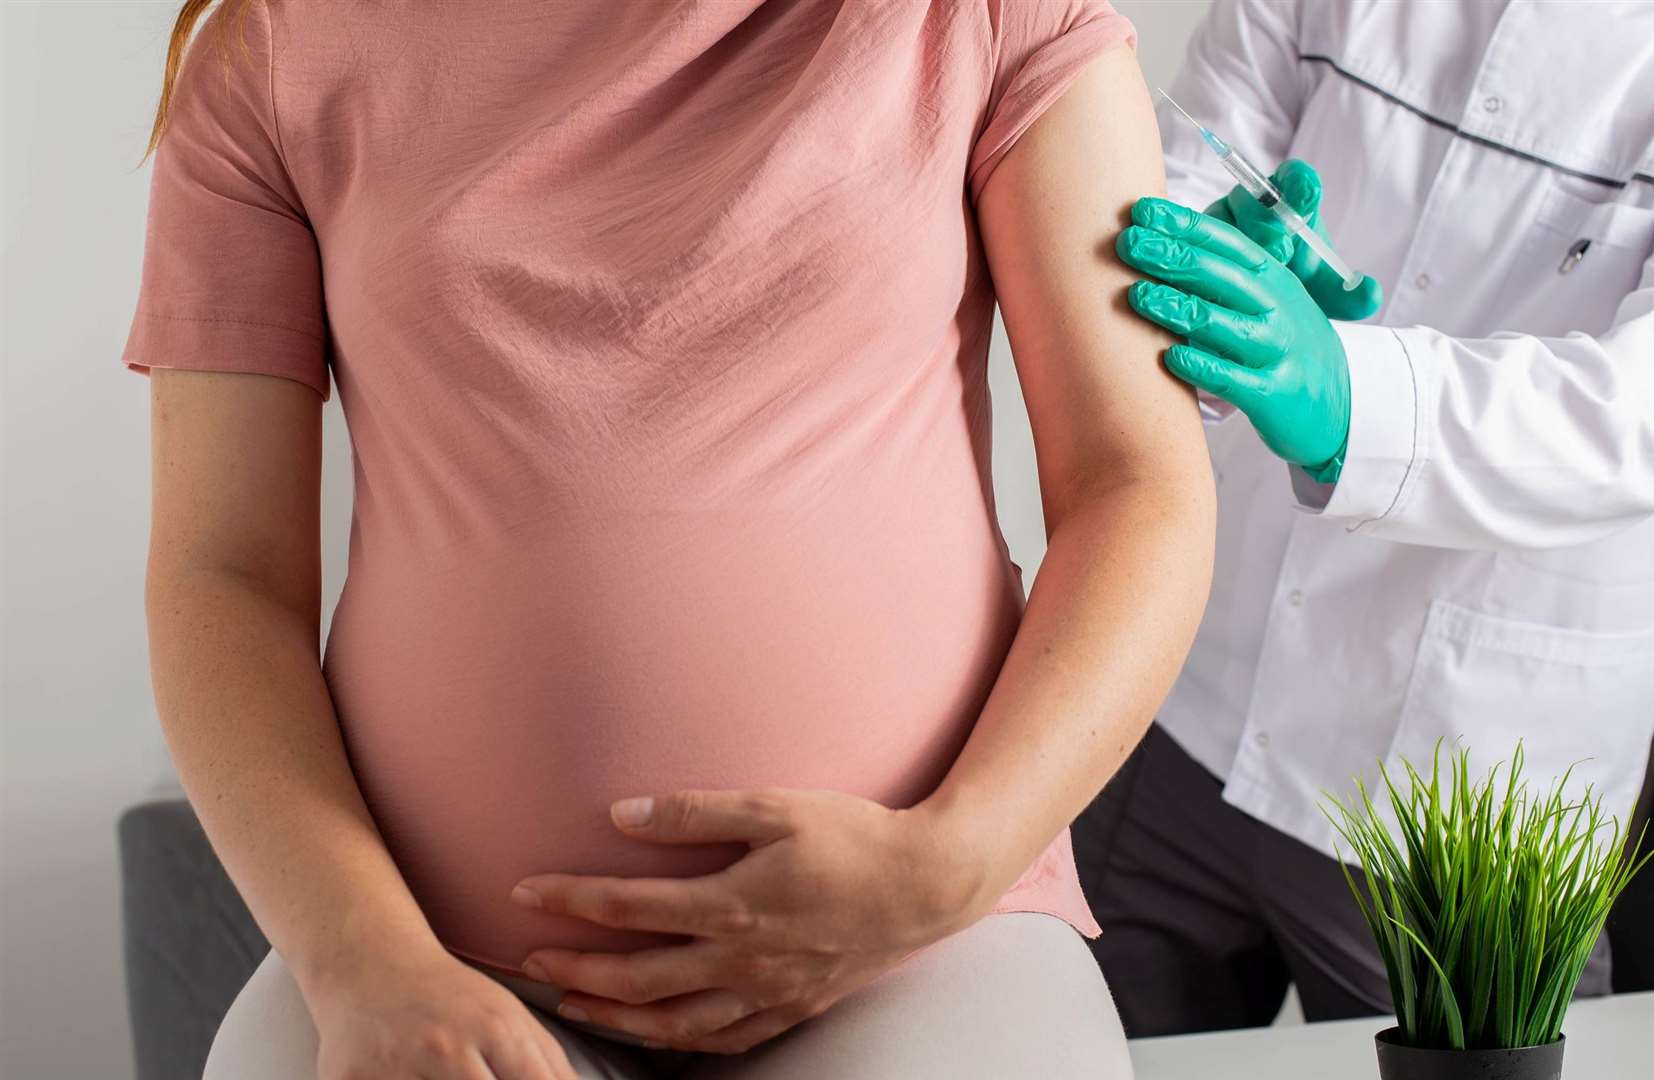 Health officials are encouraging pregnant women to come forward for a jab. Image: iStock.